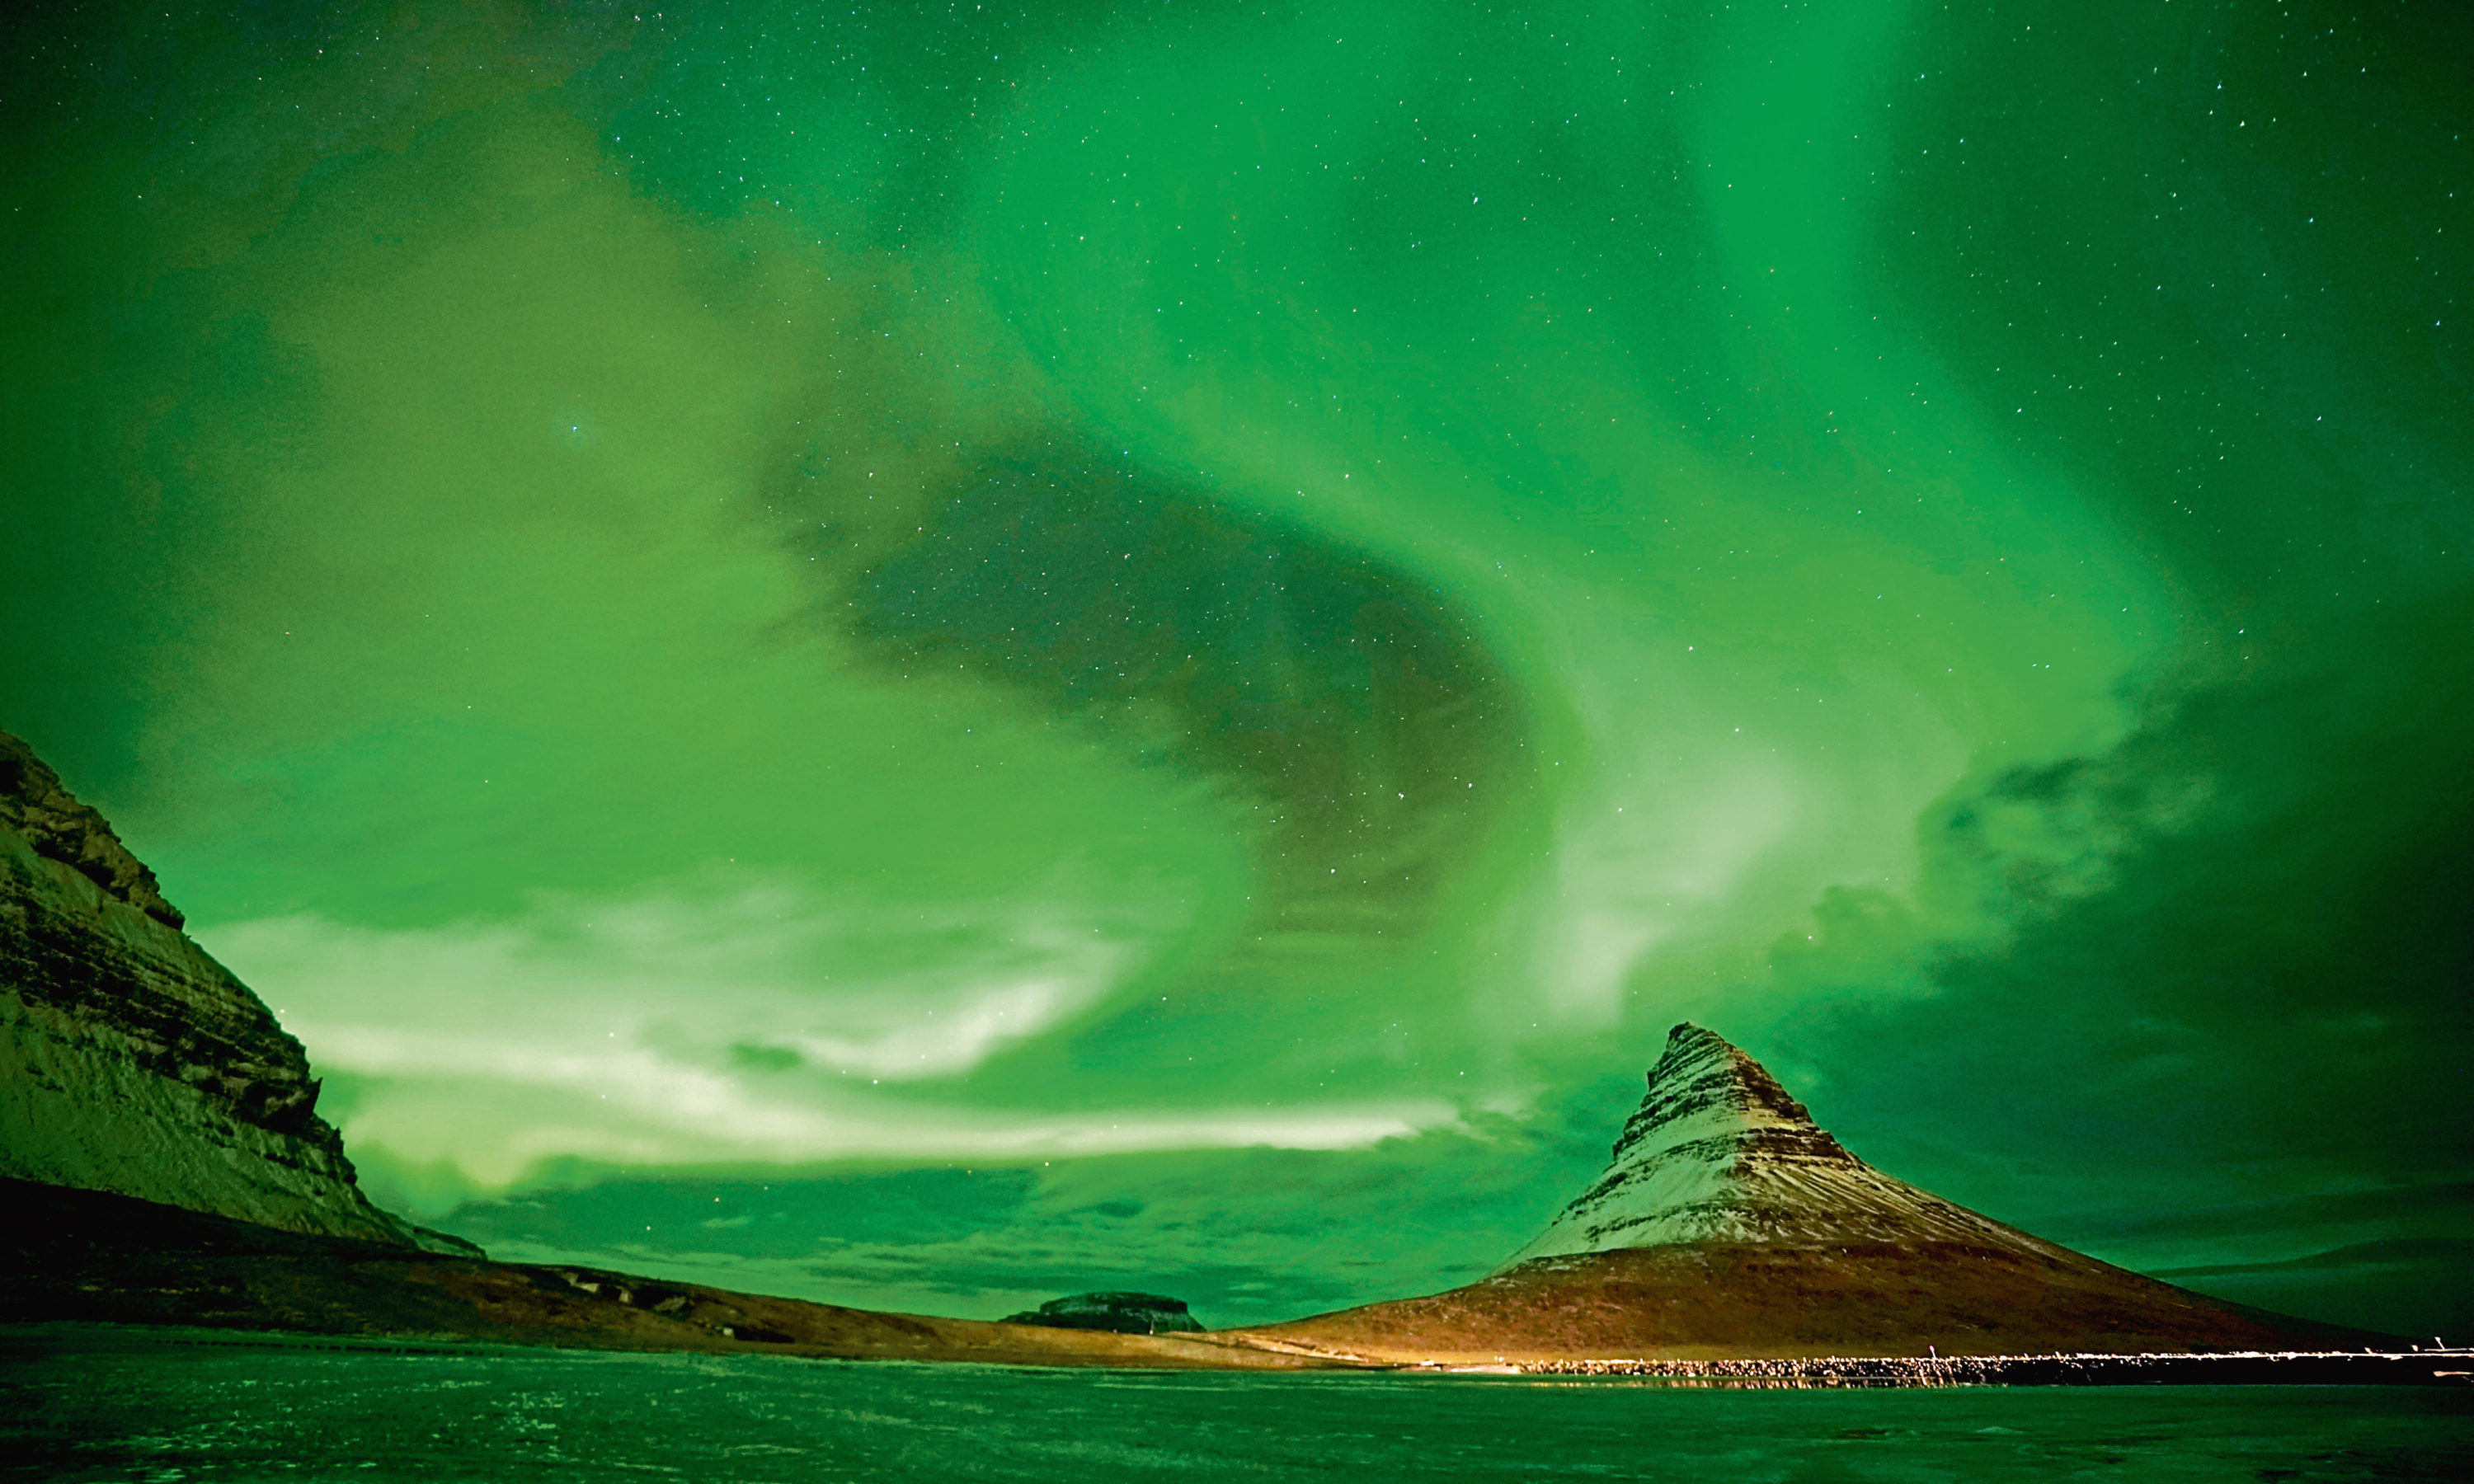 Aurora Borealis, the Northern Lights, over Kirkjufell, a 463 metre mountain on the west coast of Iceland.